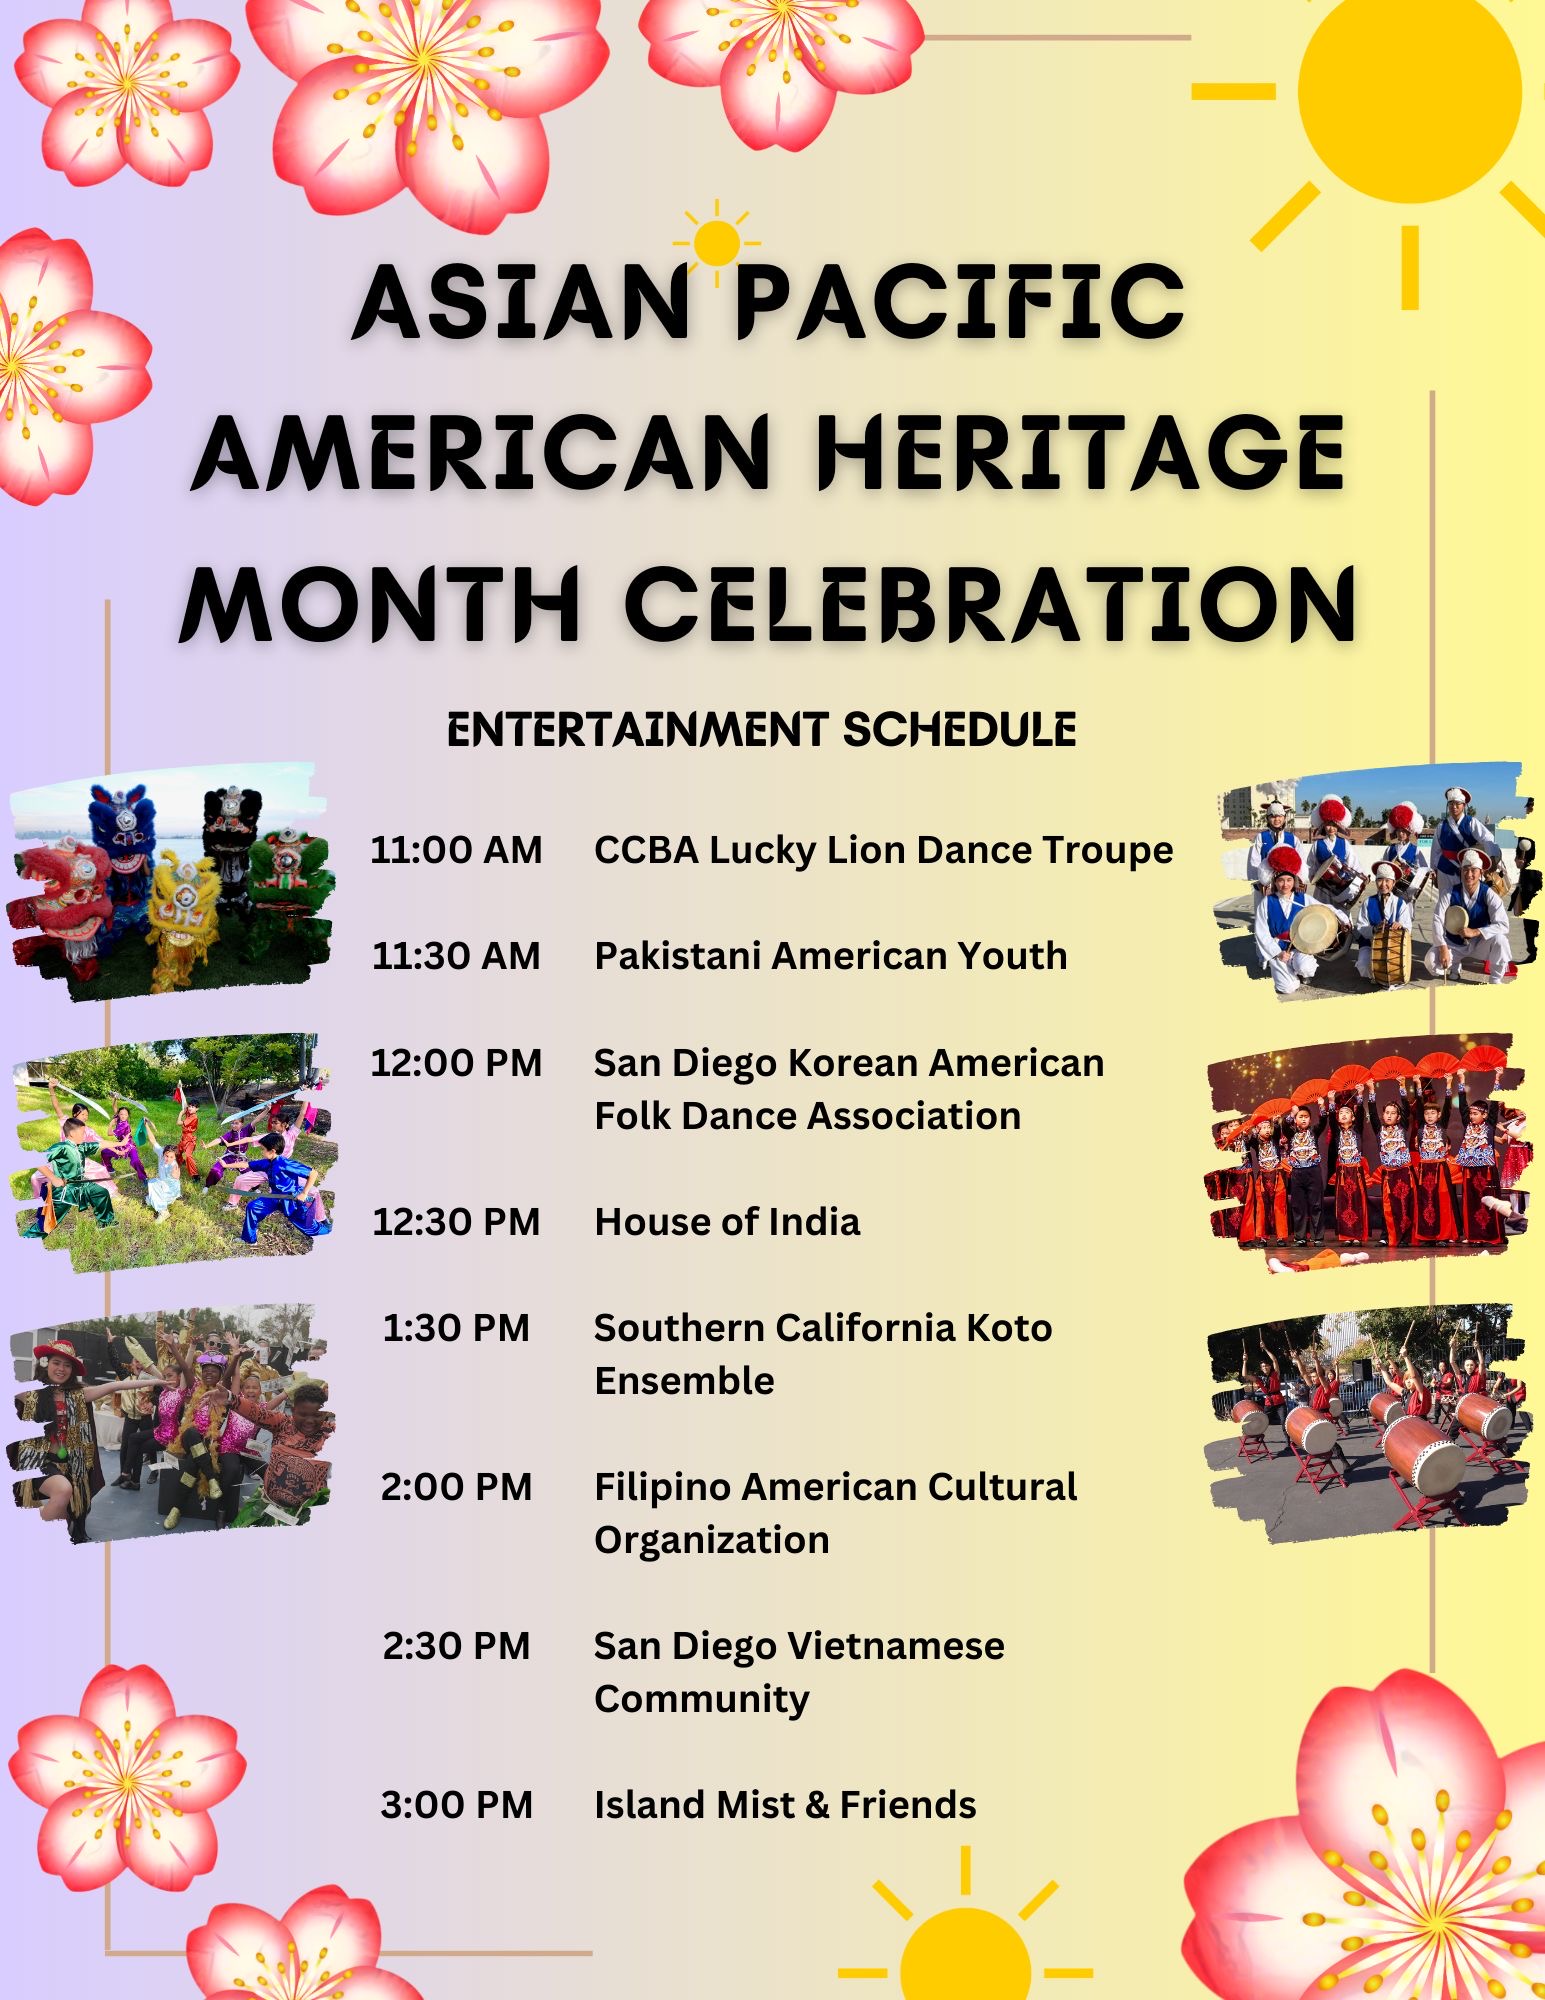 Asian Pacific American Heritage Month Celebration